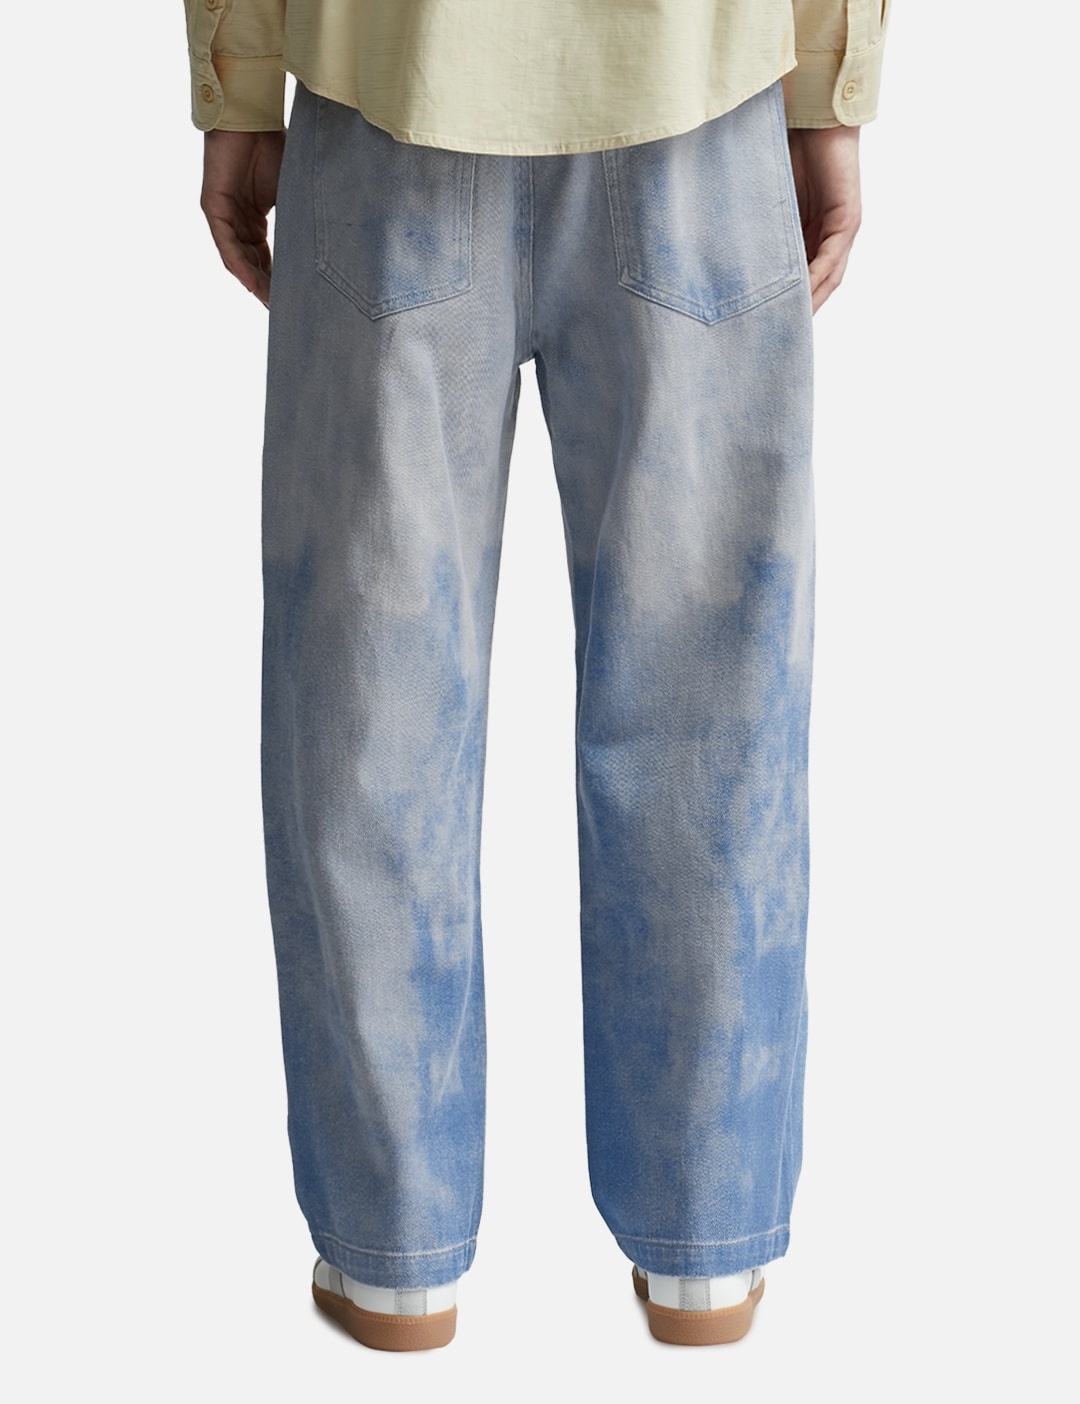 PERFORMERS DISTRESSED JEANS - 4